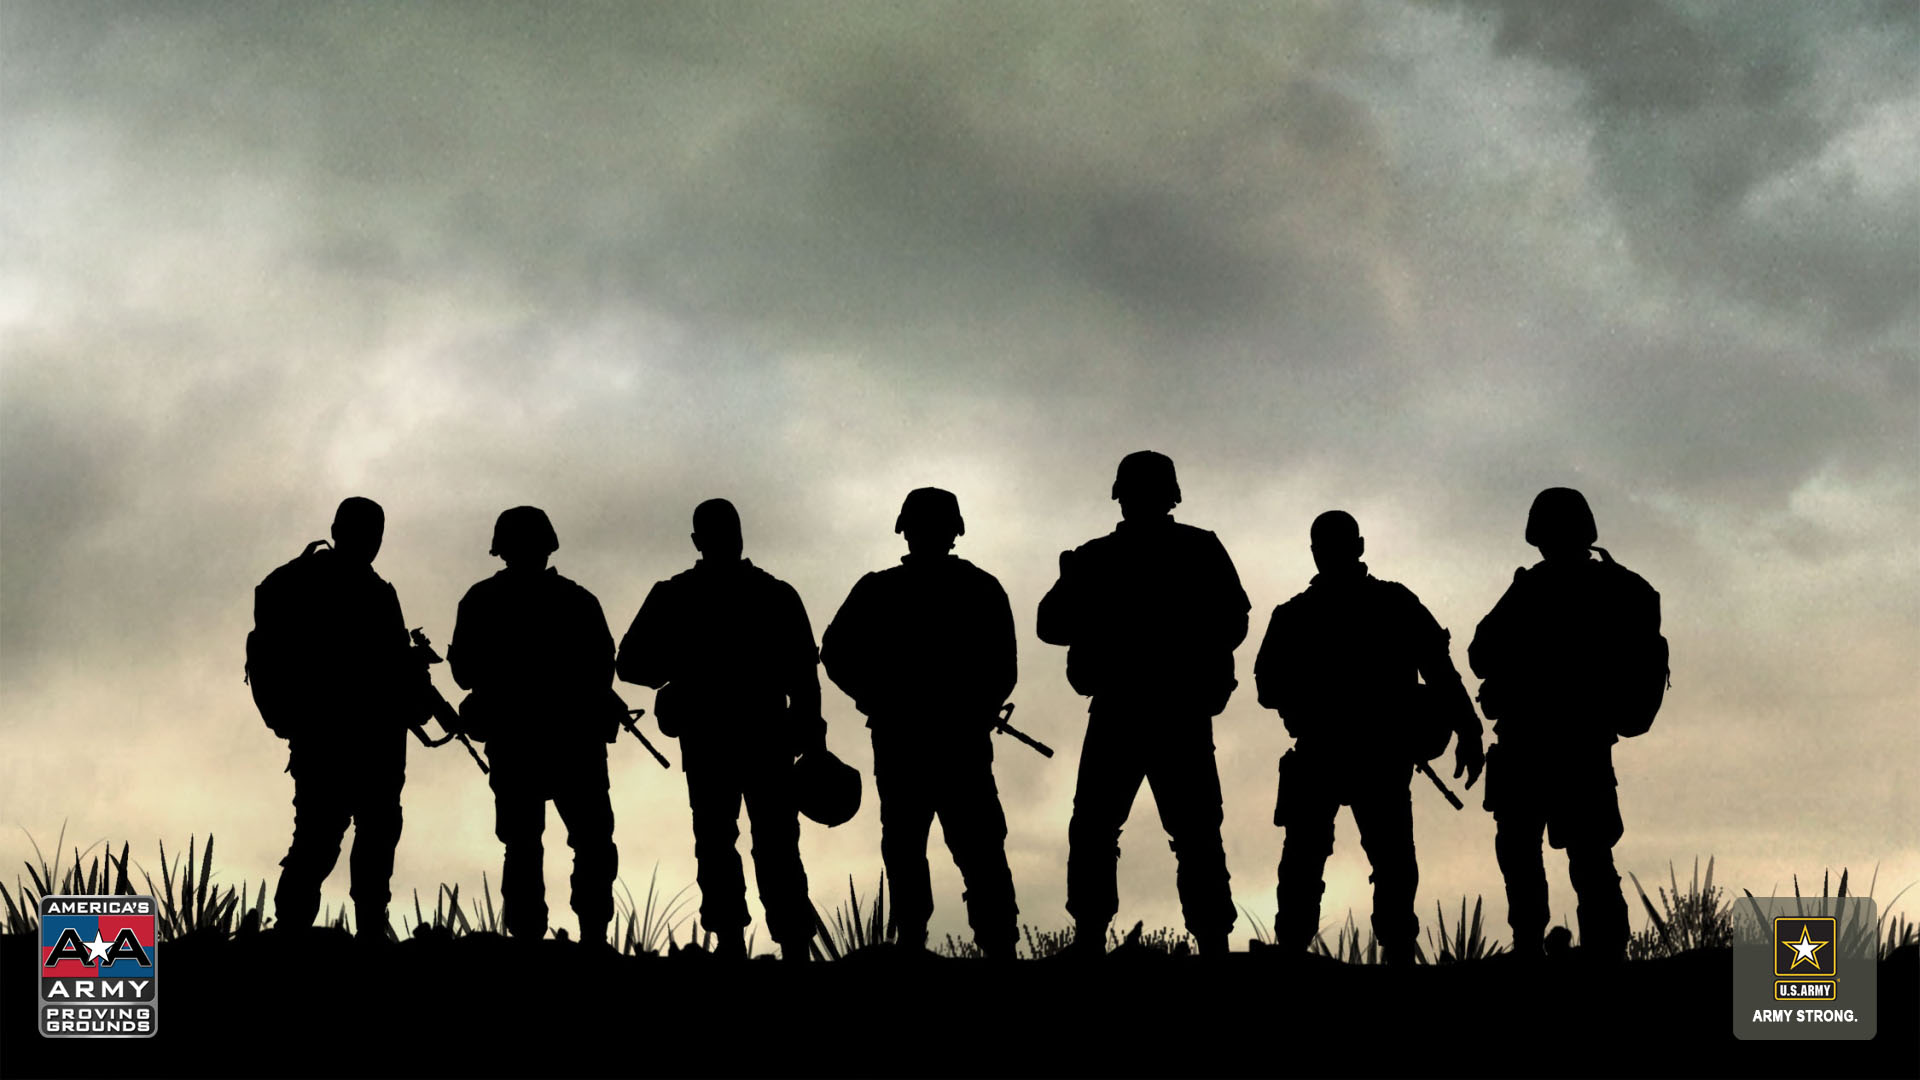 US Army Soldier Wallpaper for Free Download 36 US Army